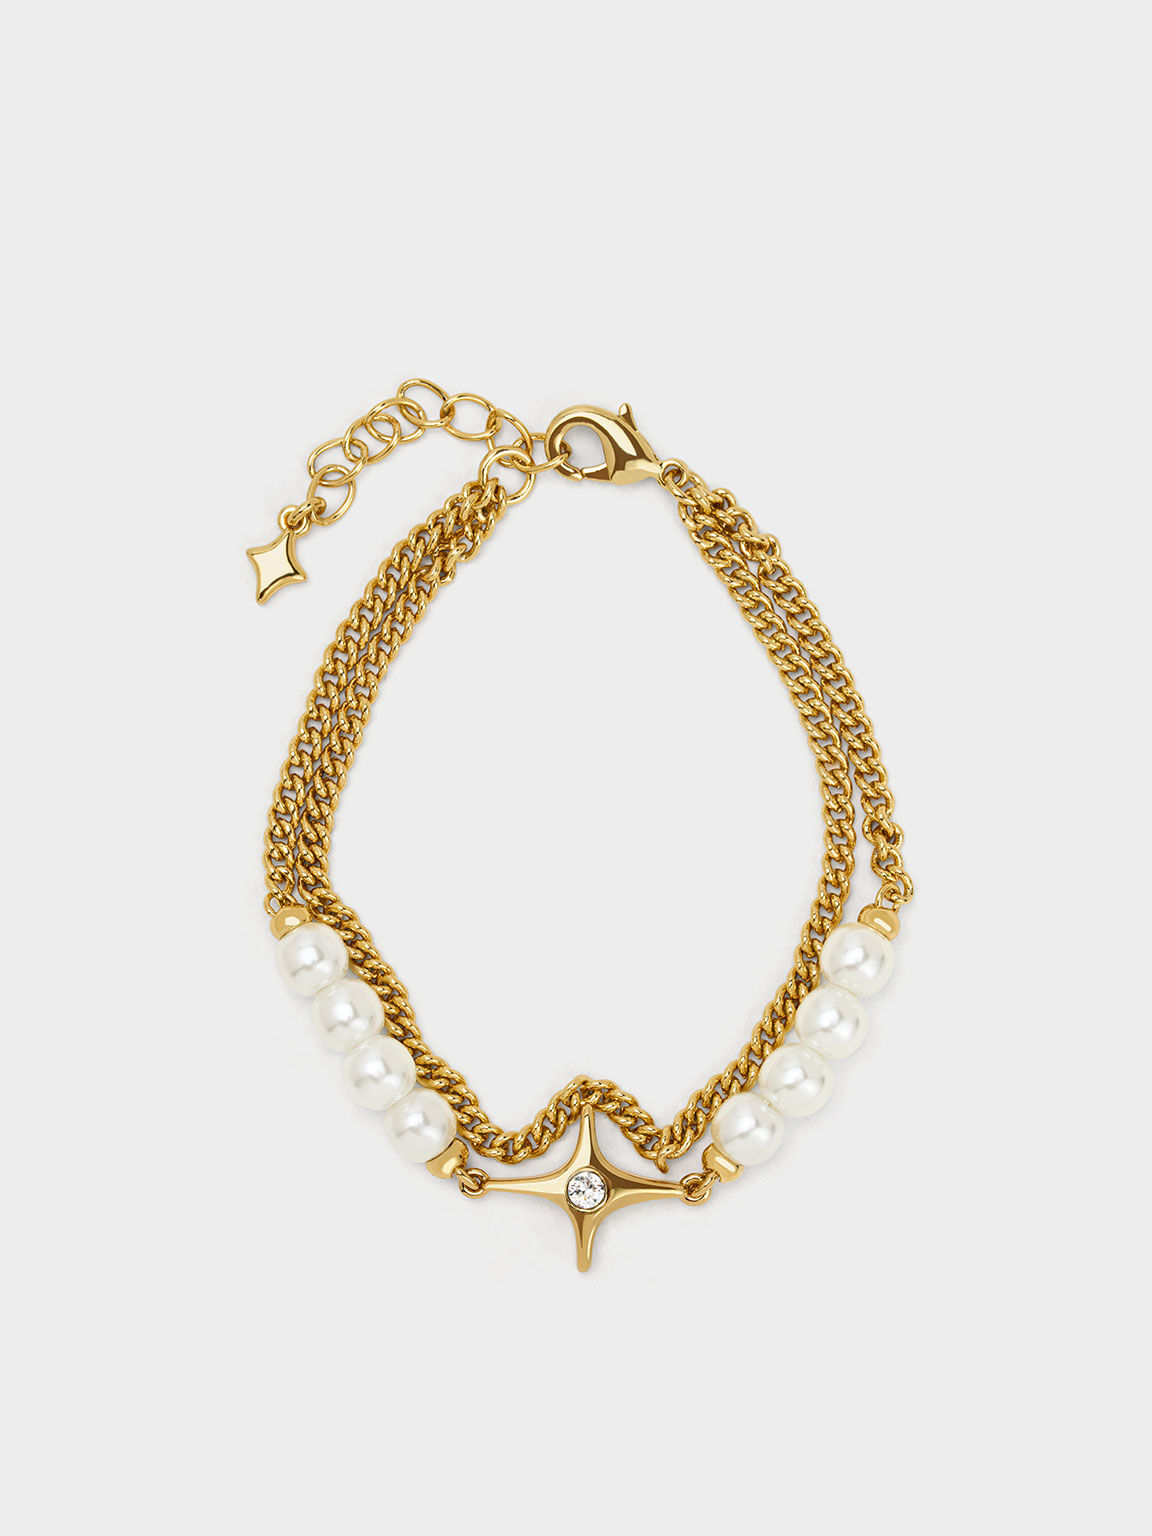 Gold Estelle Star & Pearl Choker Necklace - CHARLES & KEITH US